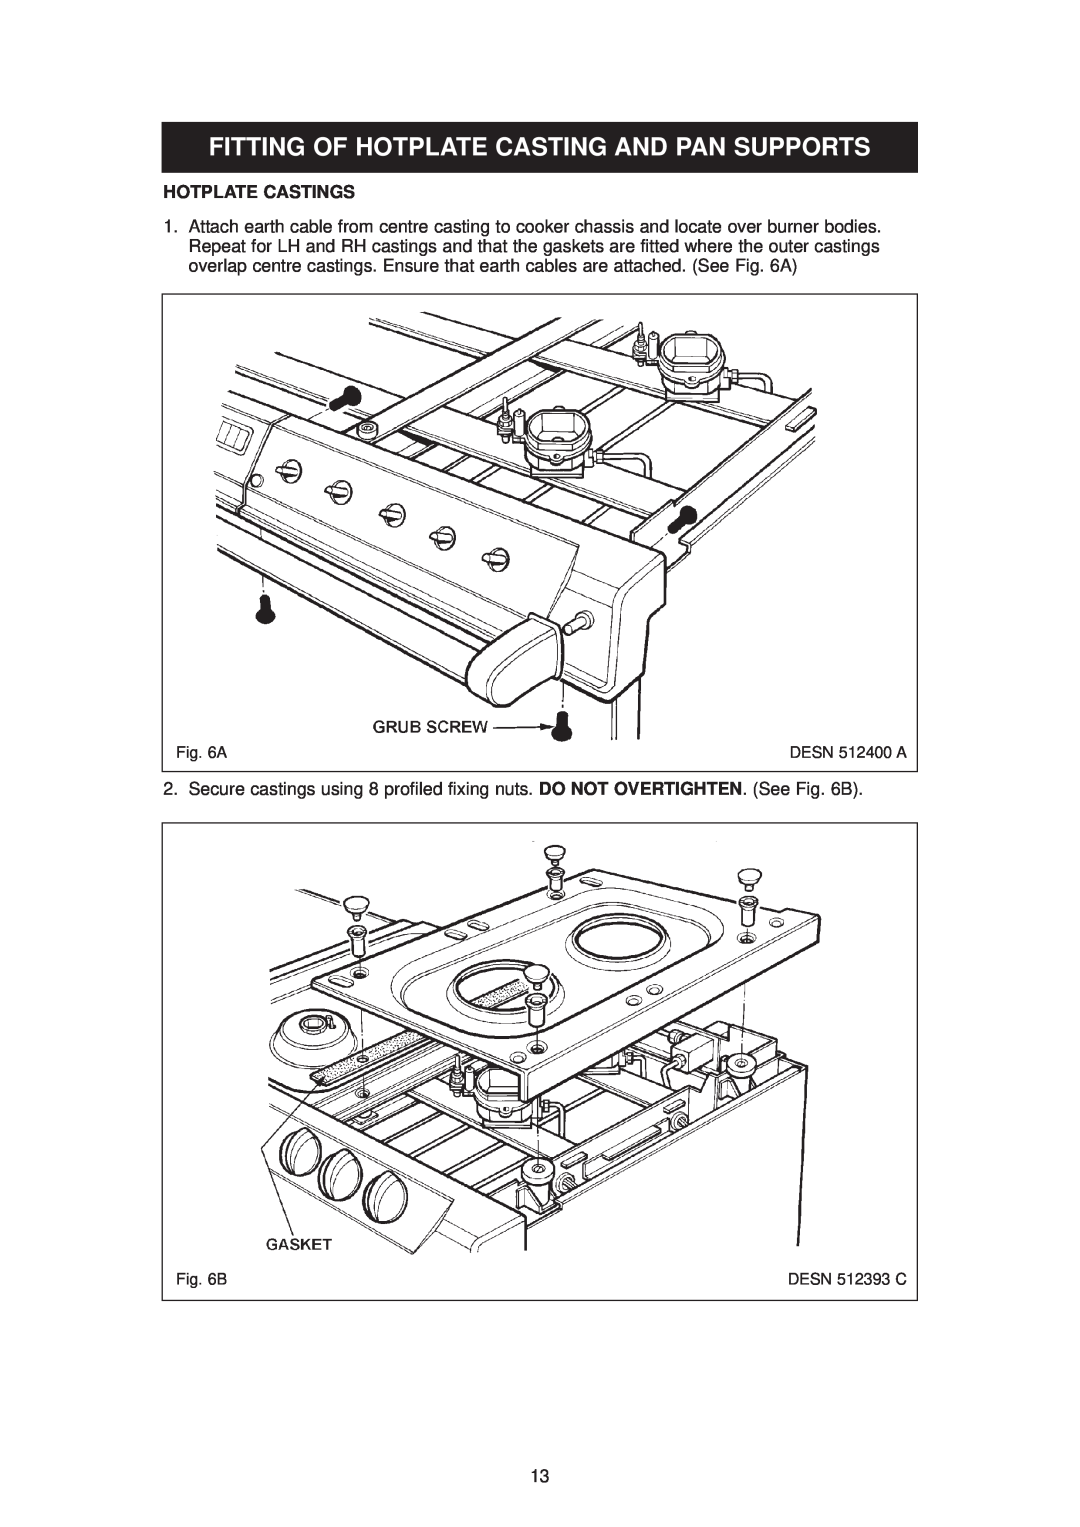 Aga Ranges DESN 512387 A owner manual Fitting Of Hotplate Casting And Pan Supports, Hotplate Castings 